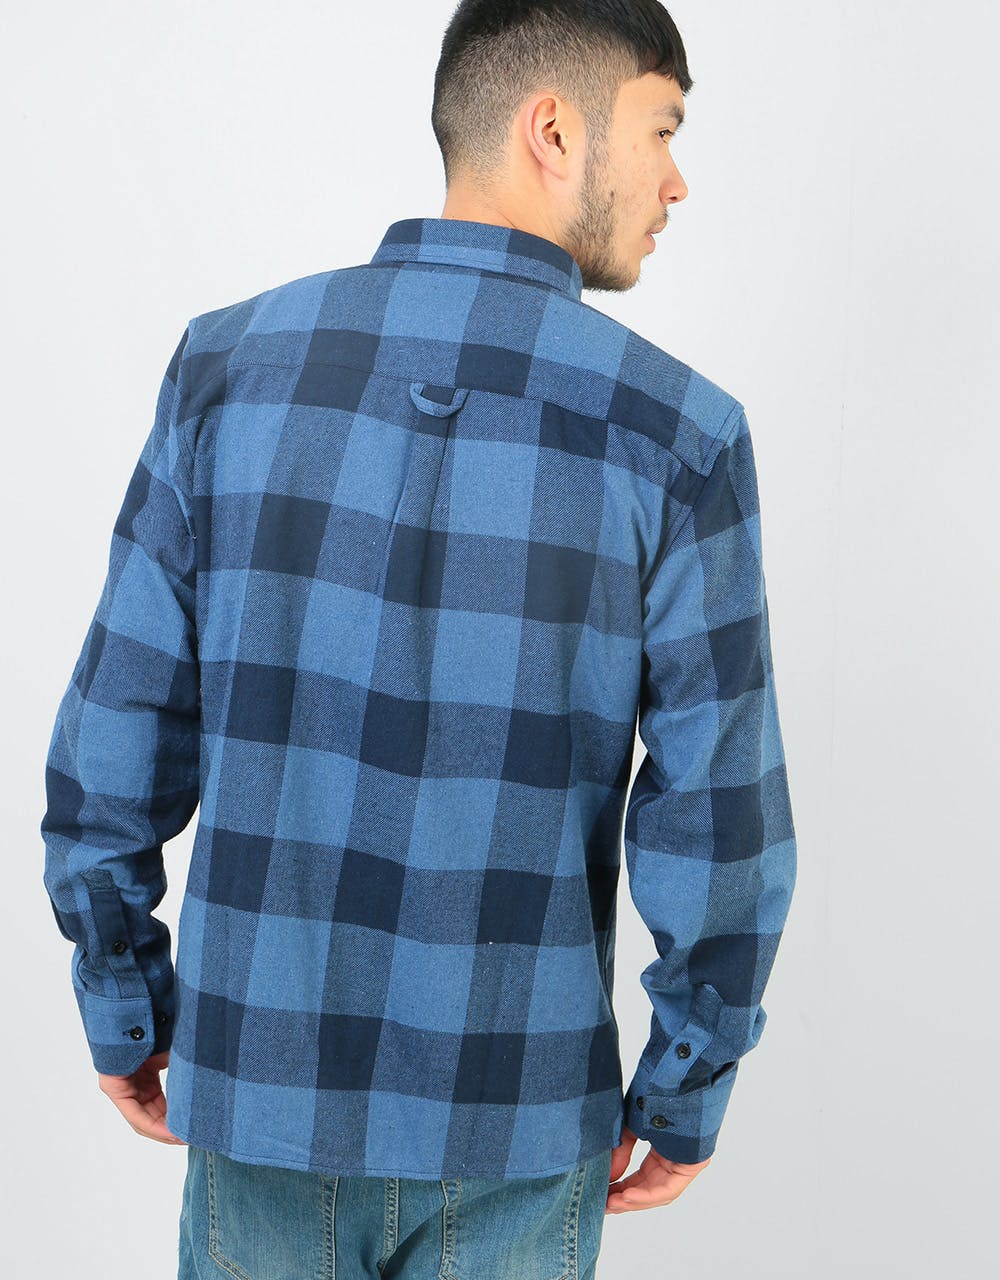 Route One Flannel Shirt - Navy Blue/Powder Blue